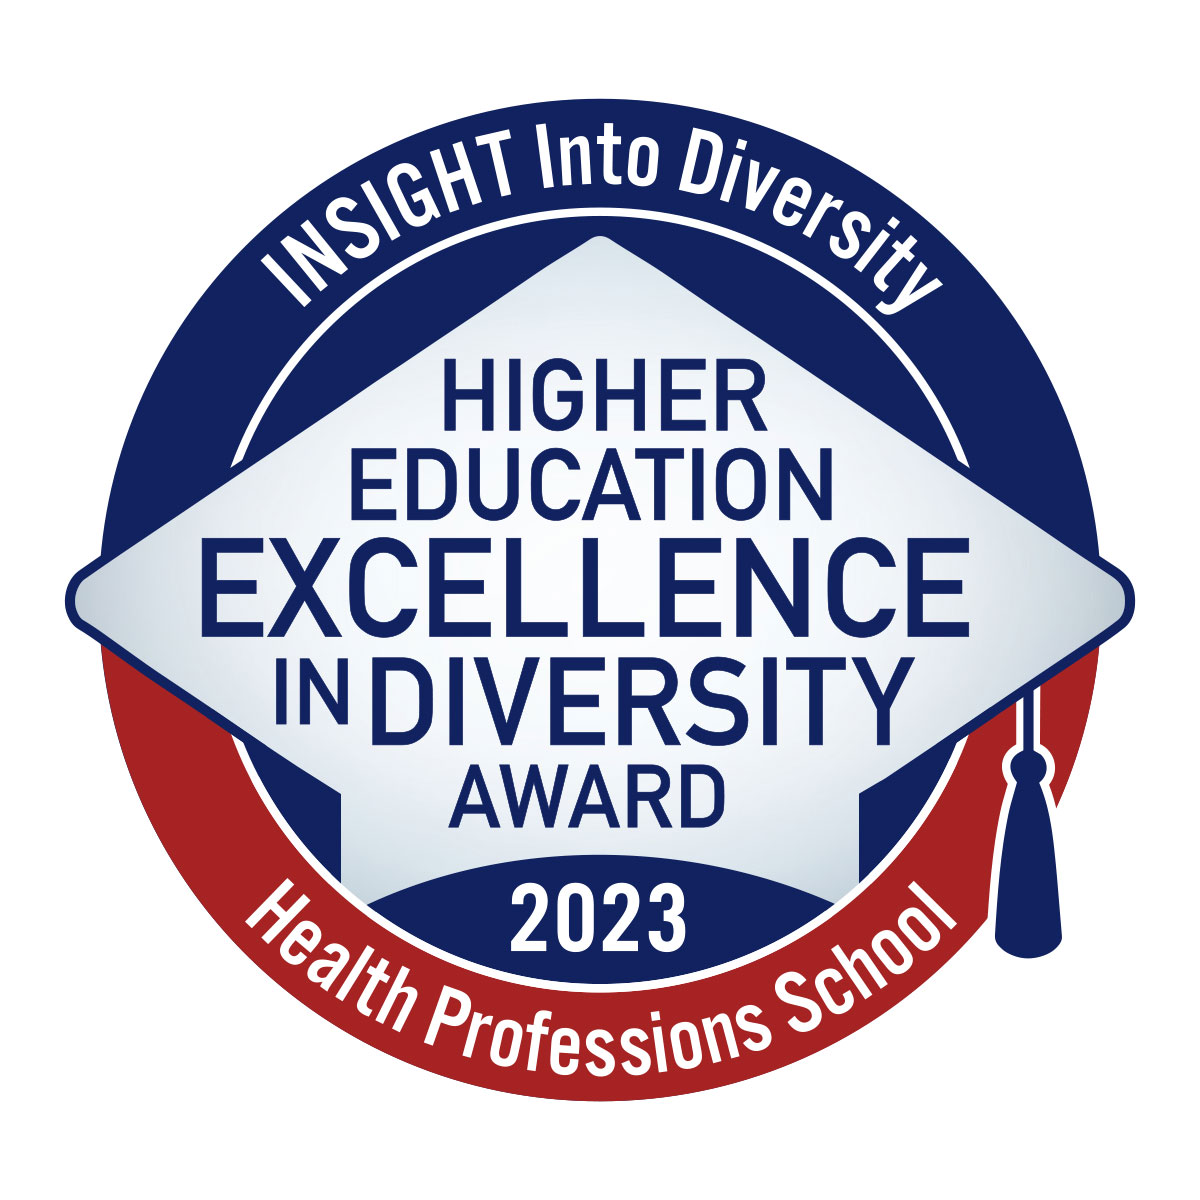 Logo for Insight Into Diversity Magazine's Higher Education Excellence in Diversity Award (Health Professions School) 2023